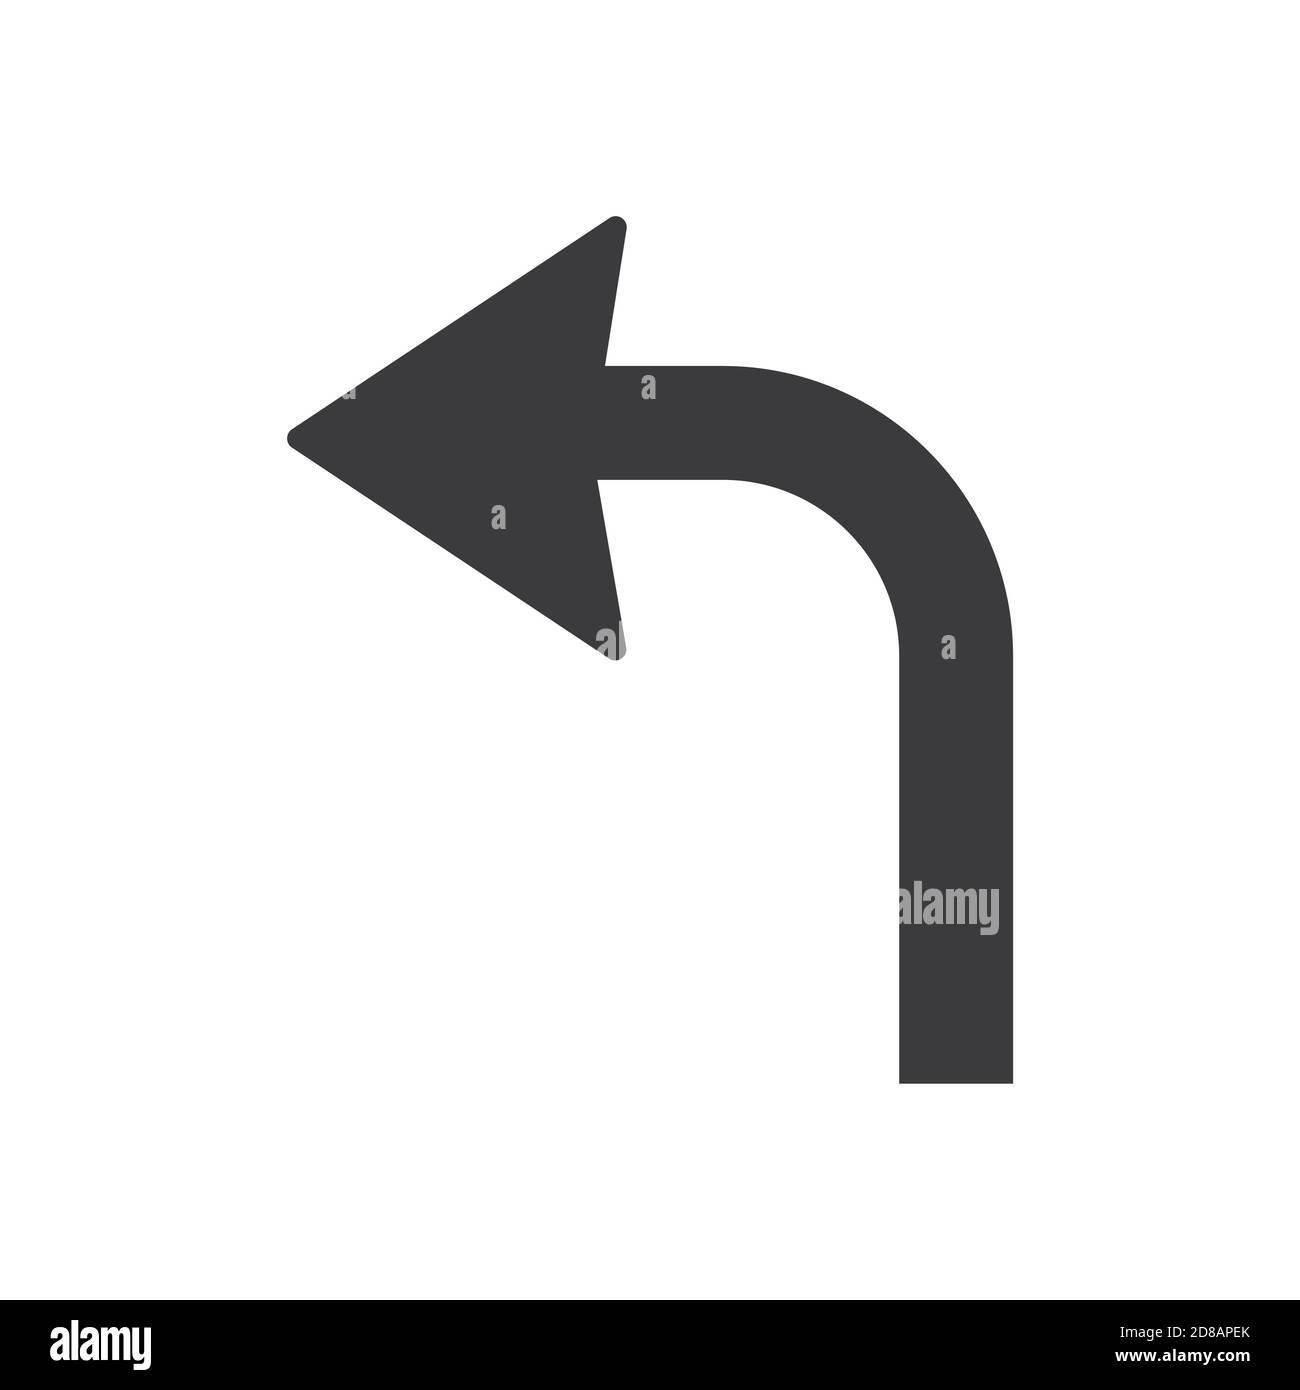 Turn left glyph icon road sign vector illustration in white background. Turn left icon sign Stock Vector